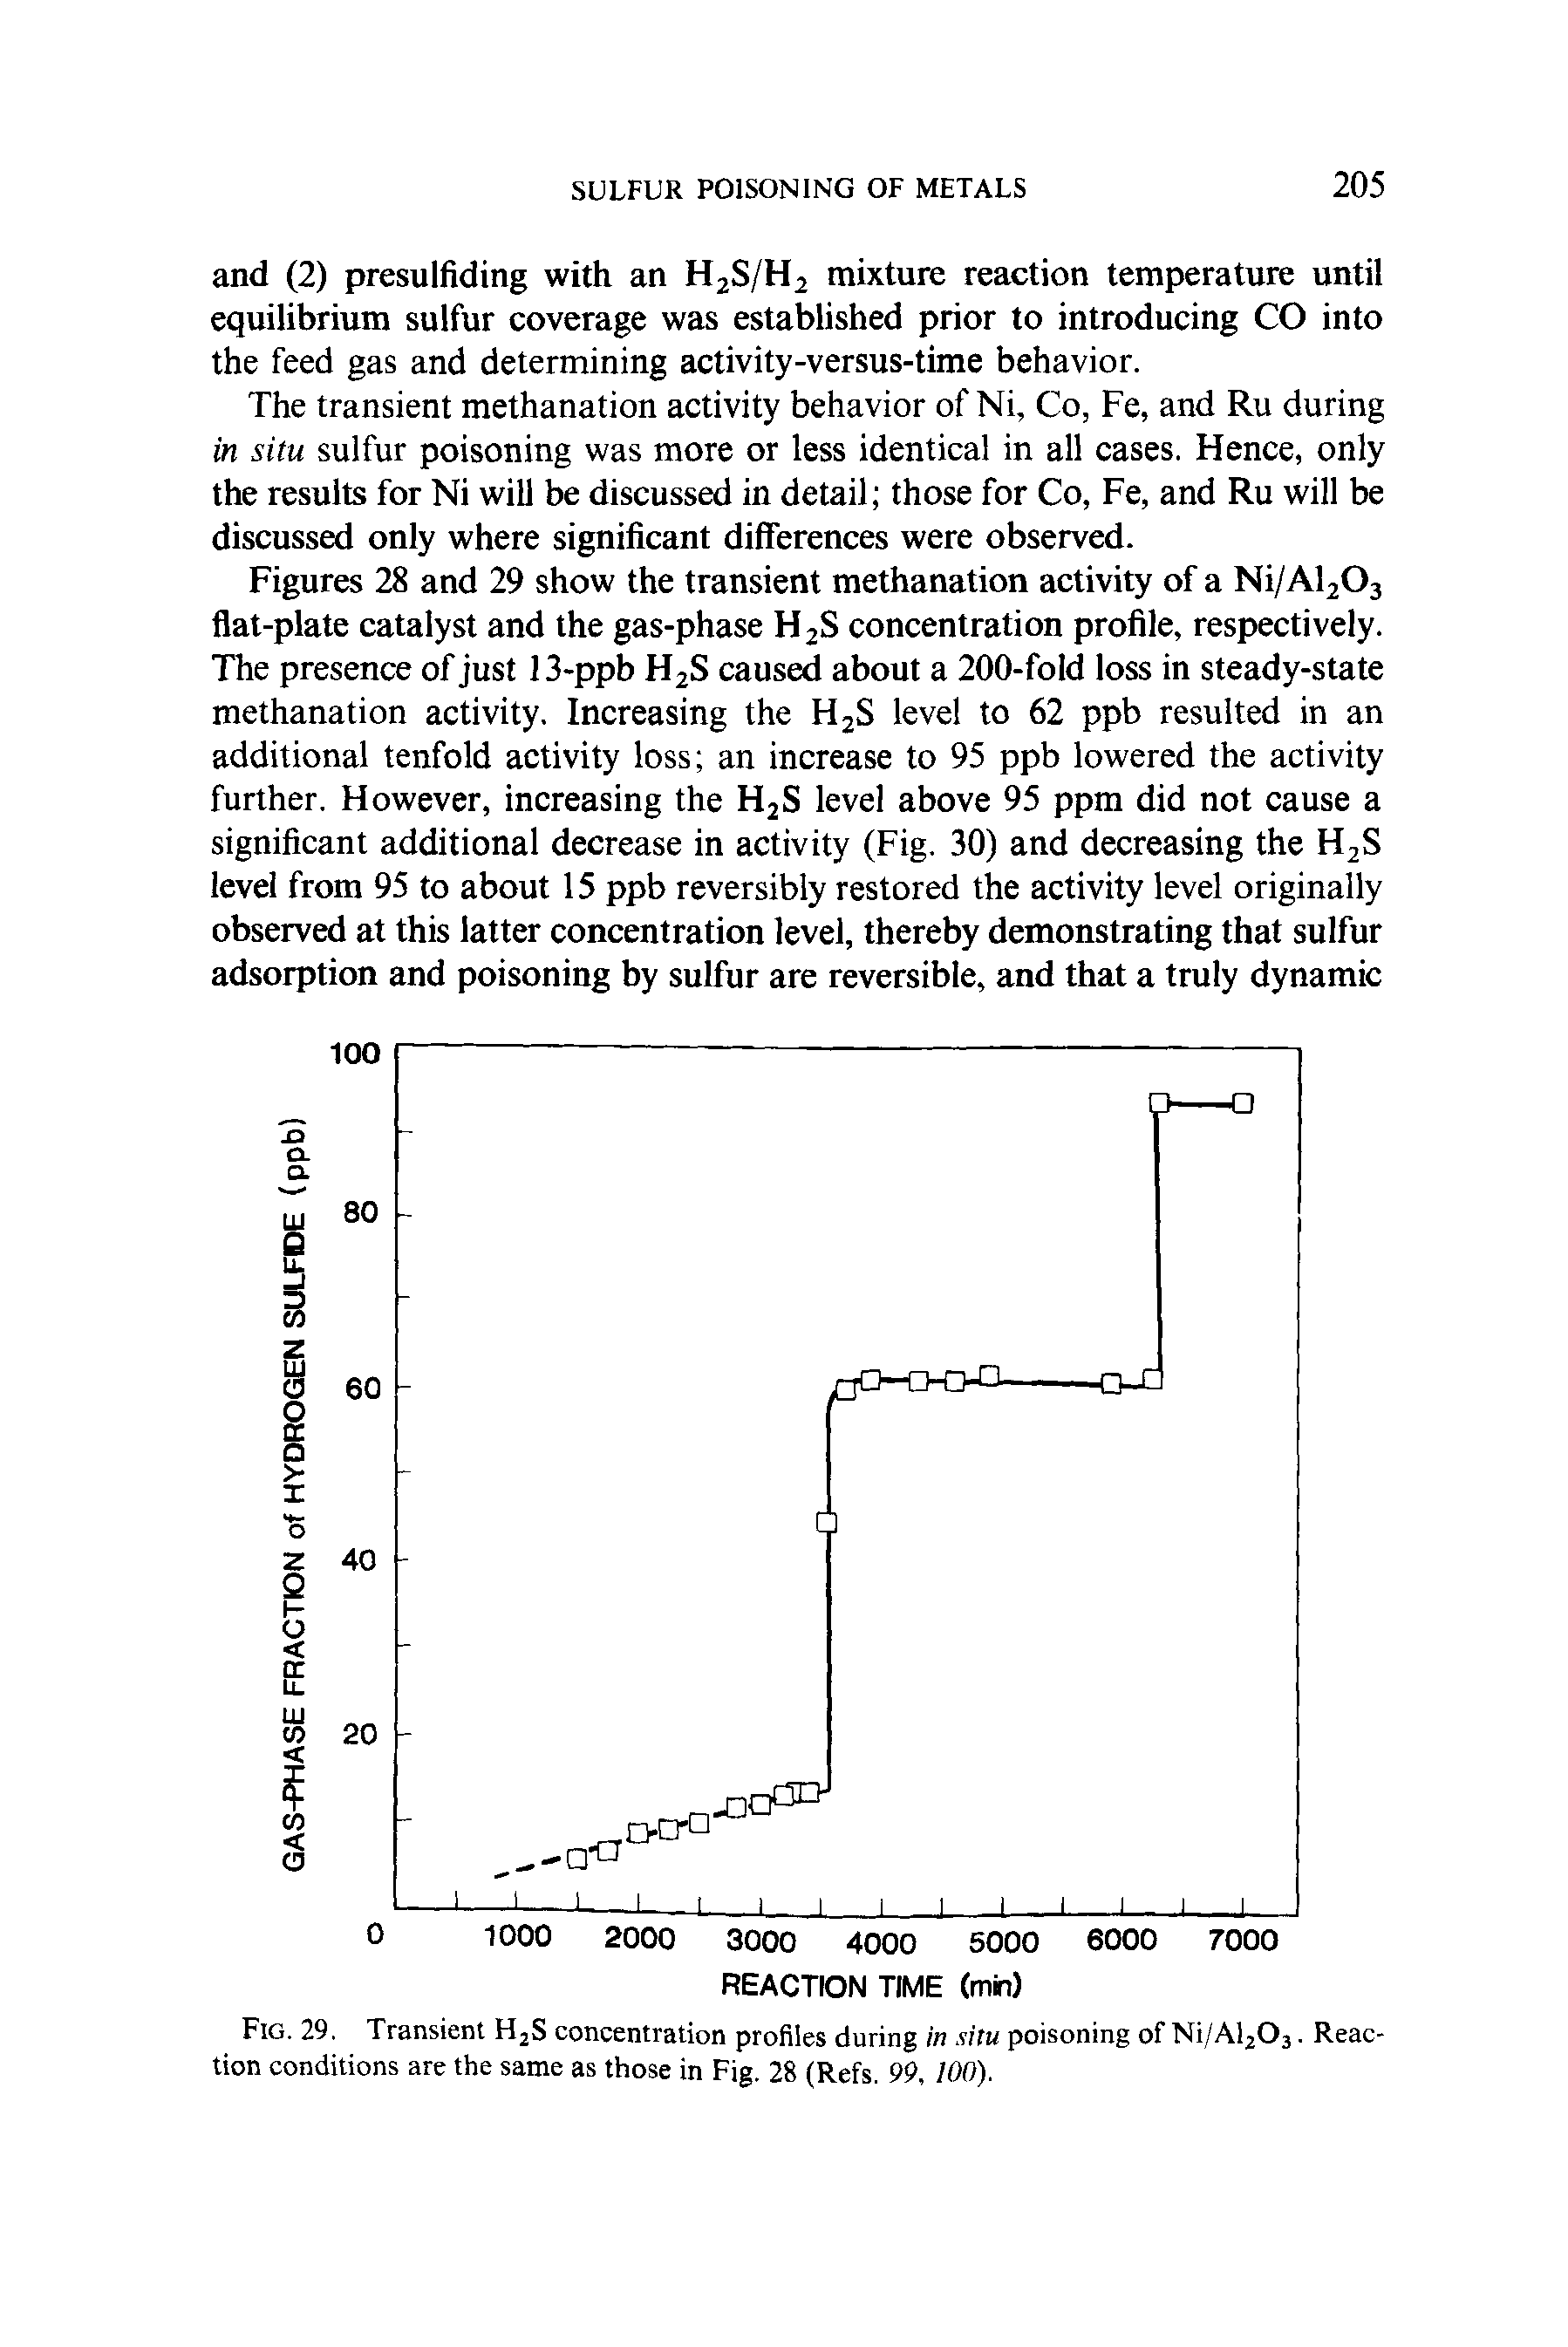 Figures 28 and 29 show the transient methanation activity of a Ni/Al203 flat-plate catalyst and the gas-phase H2S concentration profile, respectively. The presence of just 13-ppb H2S caused about a 200-fold loss in steady-state methanation activity. Increasing the H2S level to 62 ppb resulted in an additional tenfold activity loss an increase to 95 ppb lowered the activity further. However, increasing the H2S level above 95 ppm did not cause a significant additional decrease in activity (Fig. 30) and decreasing the H2S level from 95 to about 15 ppb reversibly restored the activity level originally observed at this latter concentration level, thereby demonstrating that sulfur adsorption and poisoning by sulfur are reversible, and that a truly dynamic...